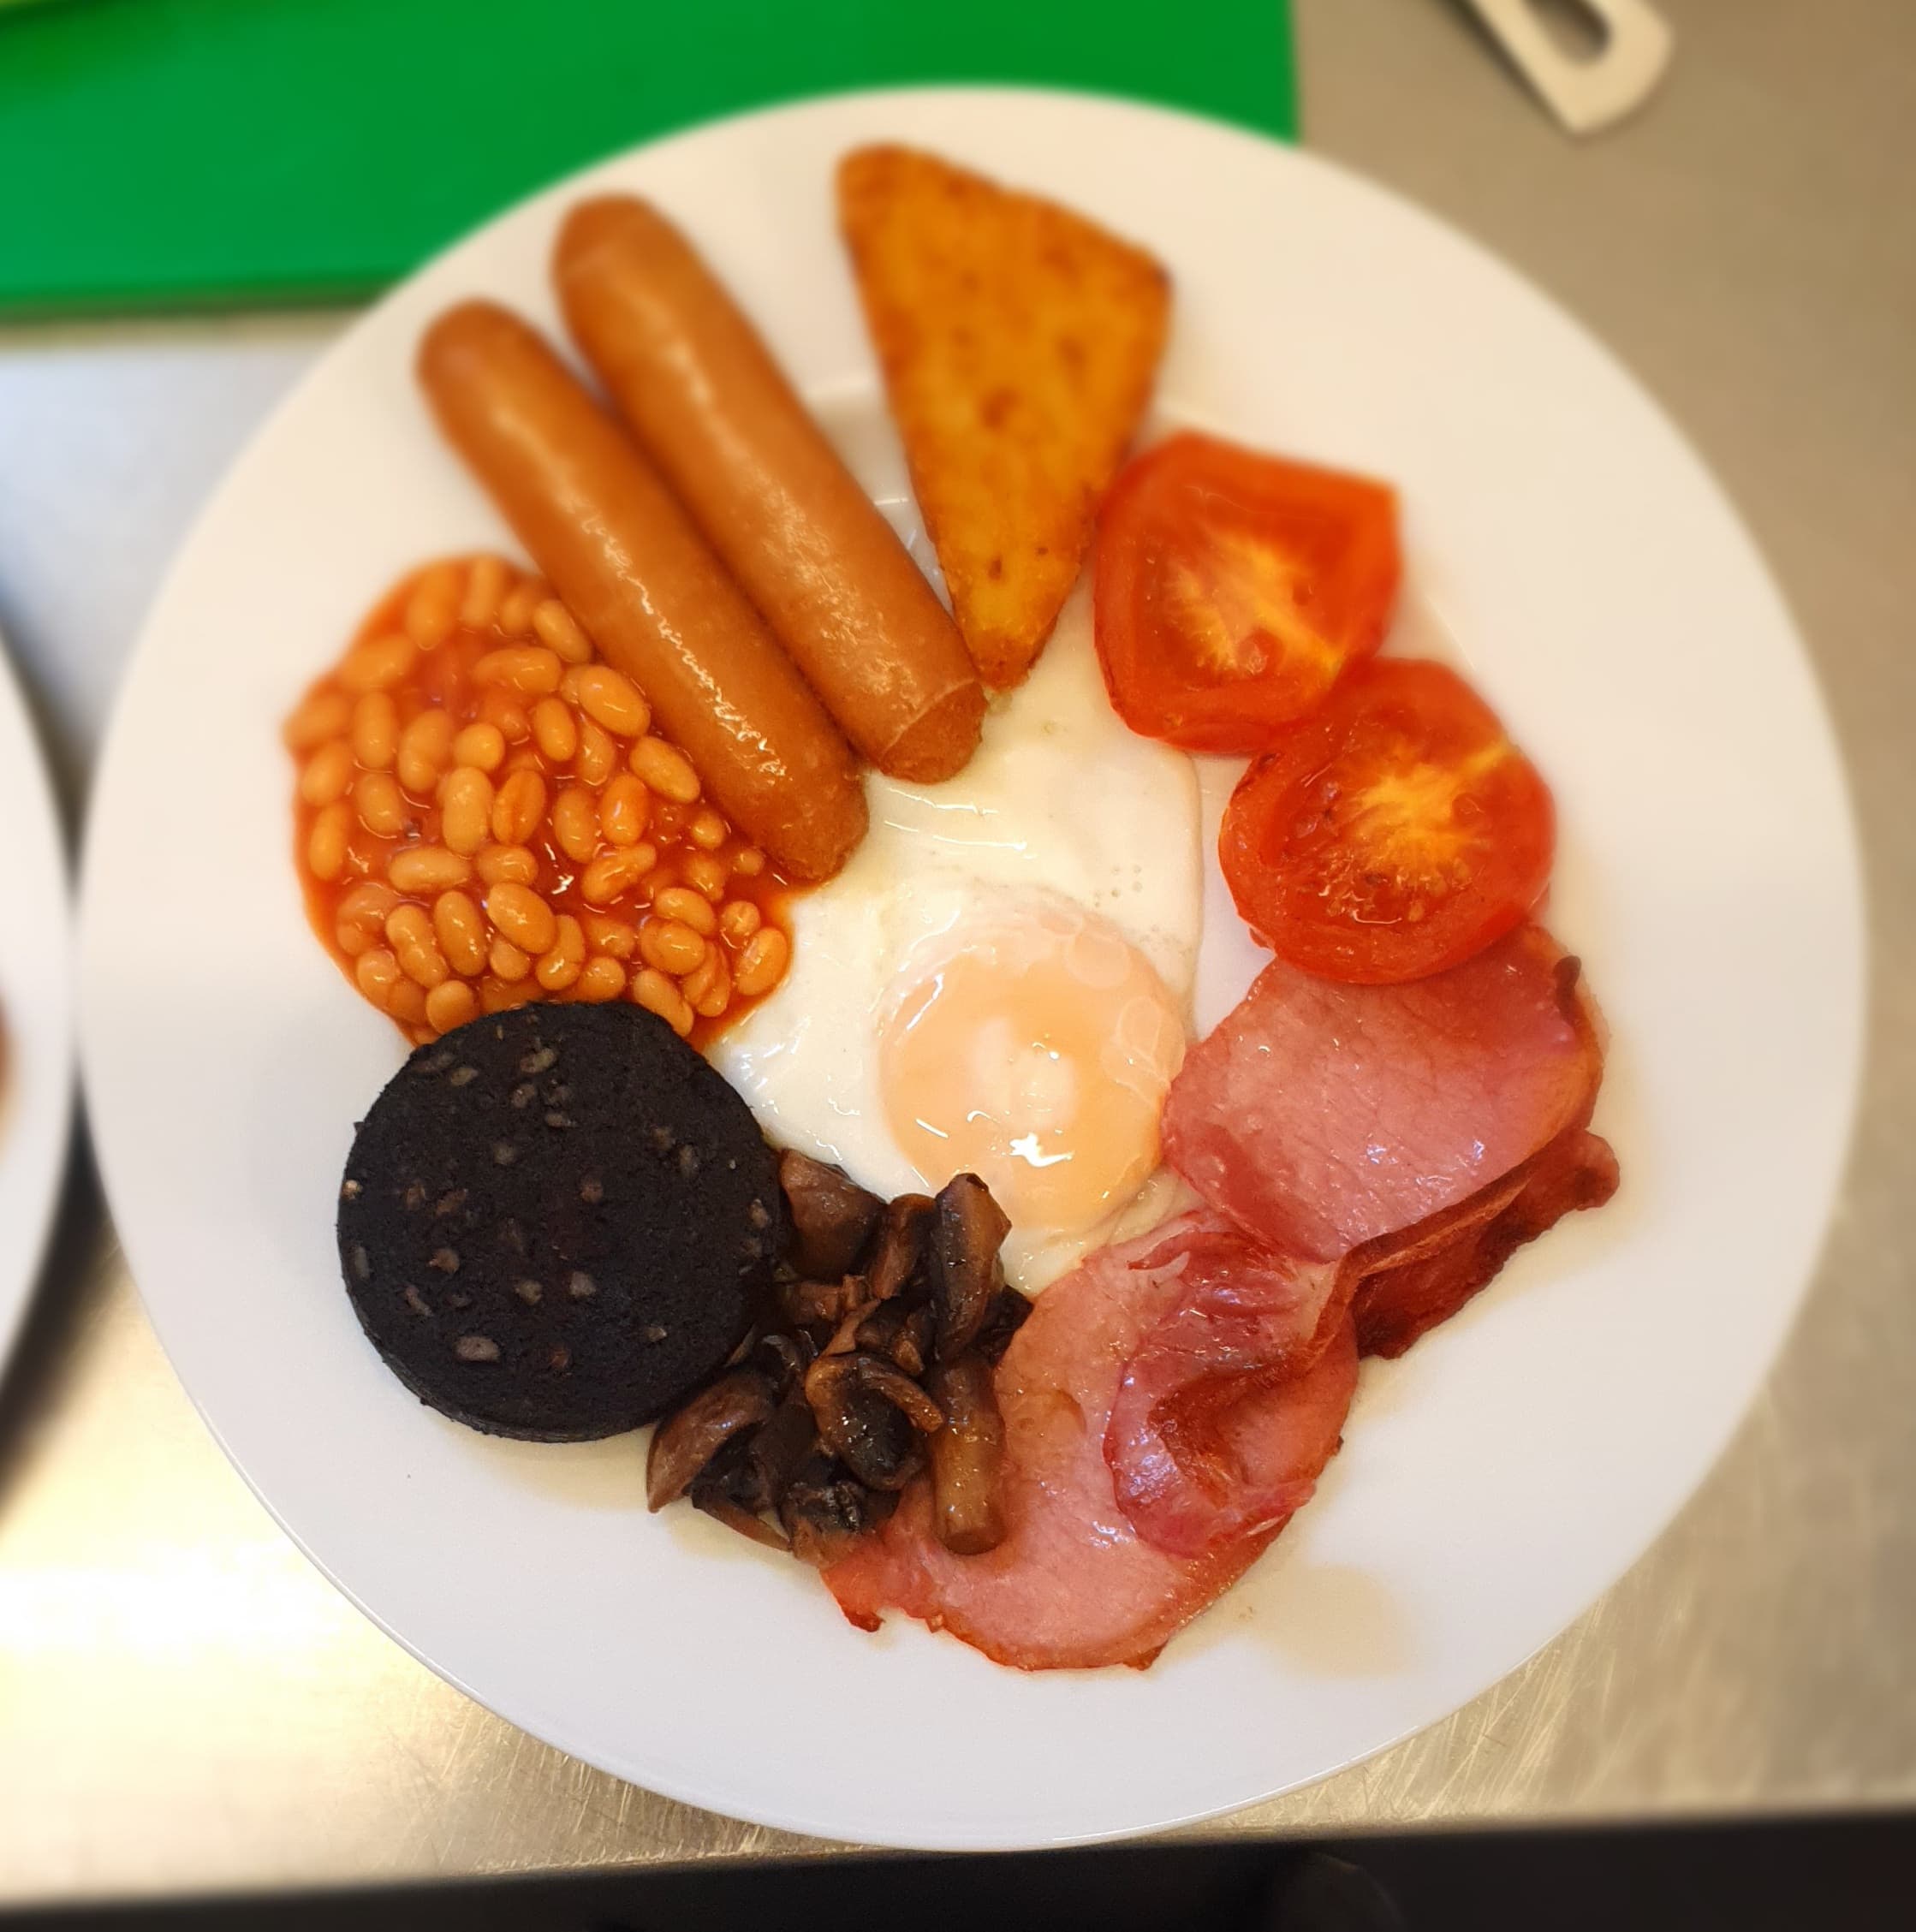 Photo of cooked breakfast, including egg, bacon, blackpudding, tomatoes, mushrooms, eggs